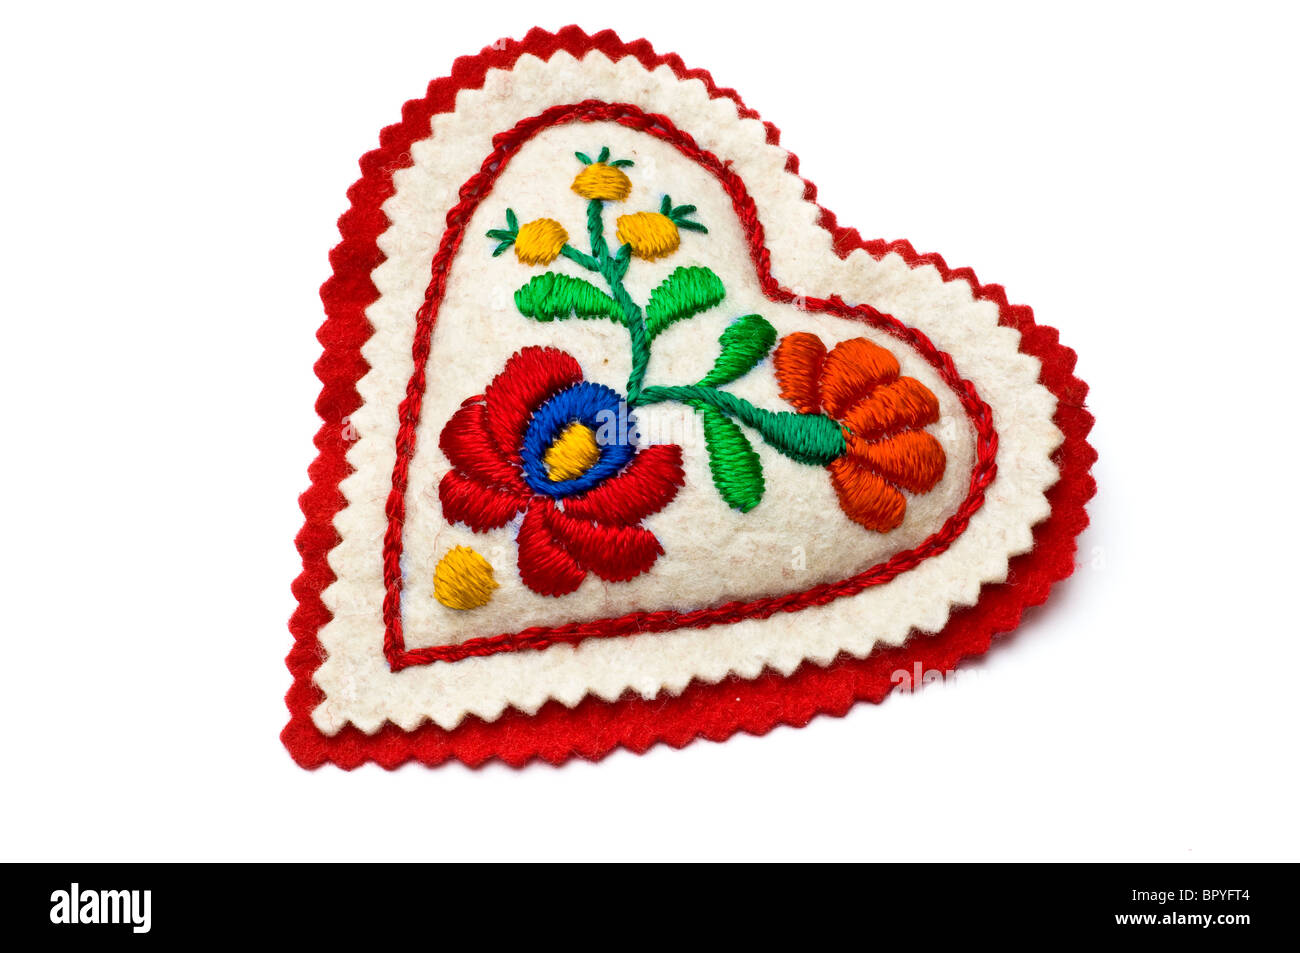 Red Scalloped Beginner Embroidery Kit - Hungarian Store